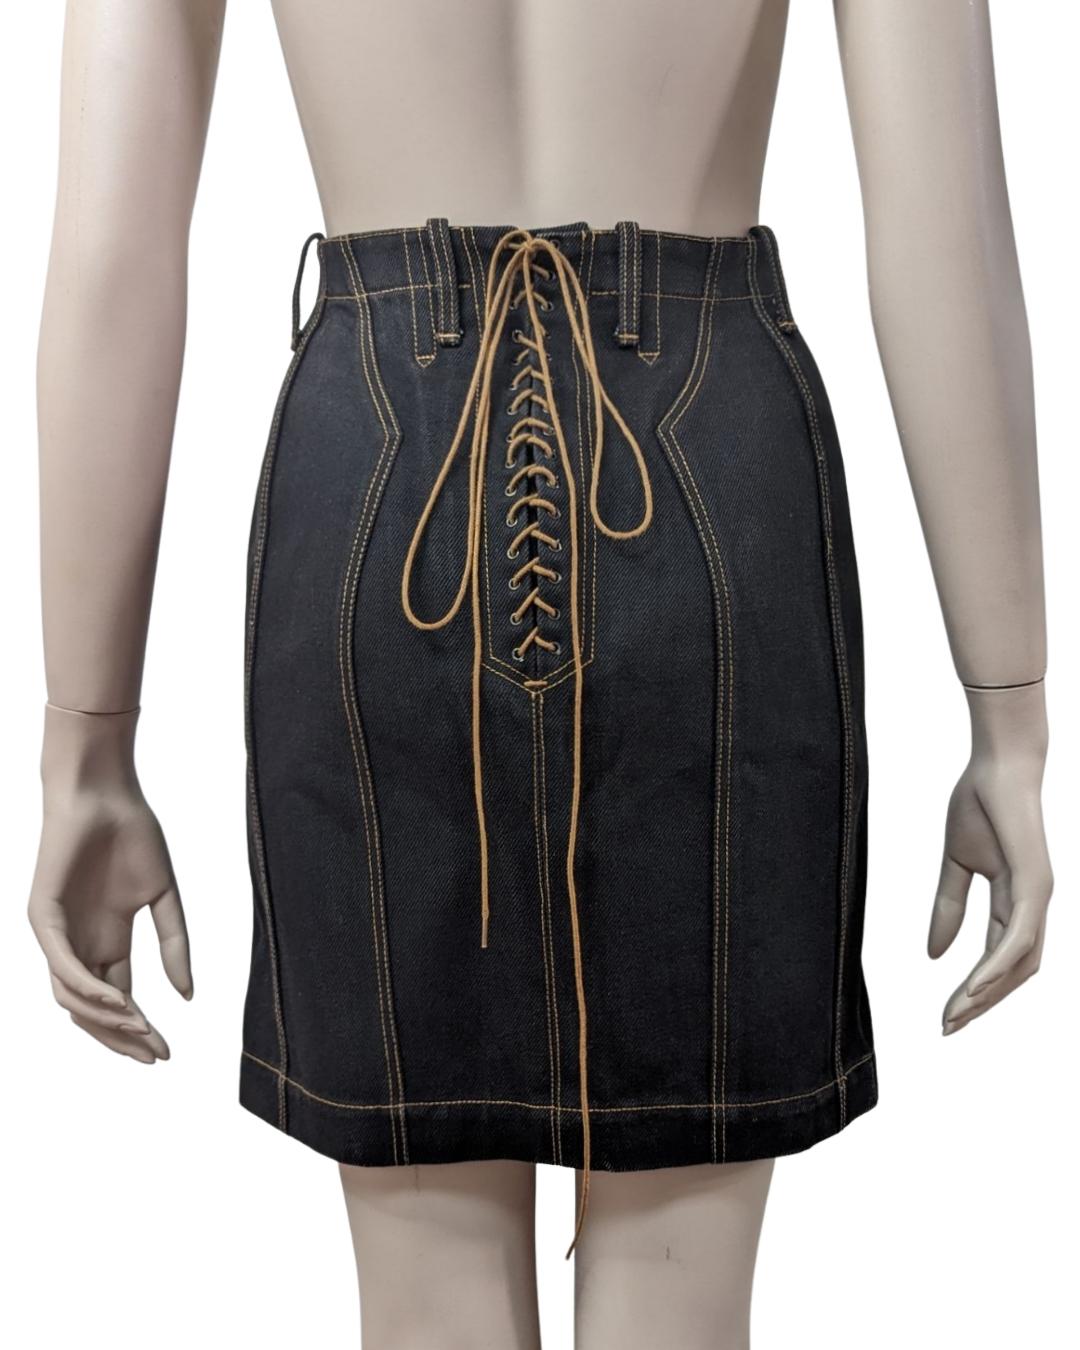 By Azzedine Alaïa from the S/S 1991 collection. Rarety.


. High-waist denim skirt
· Lace-up  back details
· Geometric contrast stitching
. Silk layer along the collar and the buttonhole
 

Fits XS, S 

Flat measurements : 

Waist : 35 cm
Hips : 44